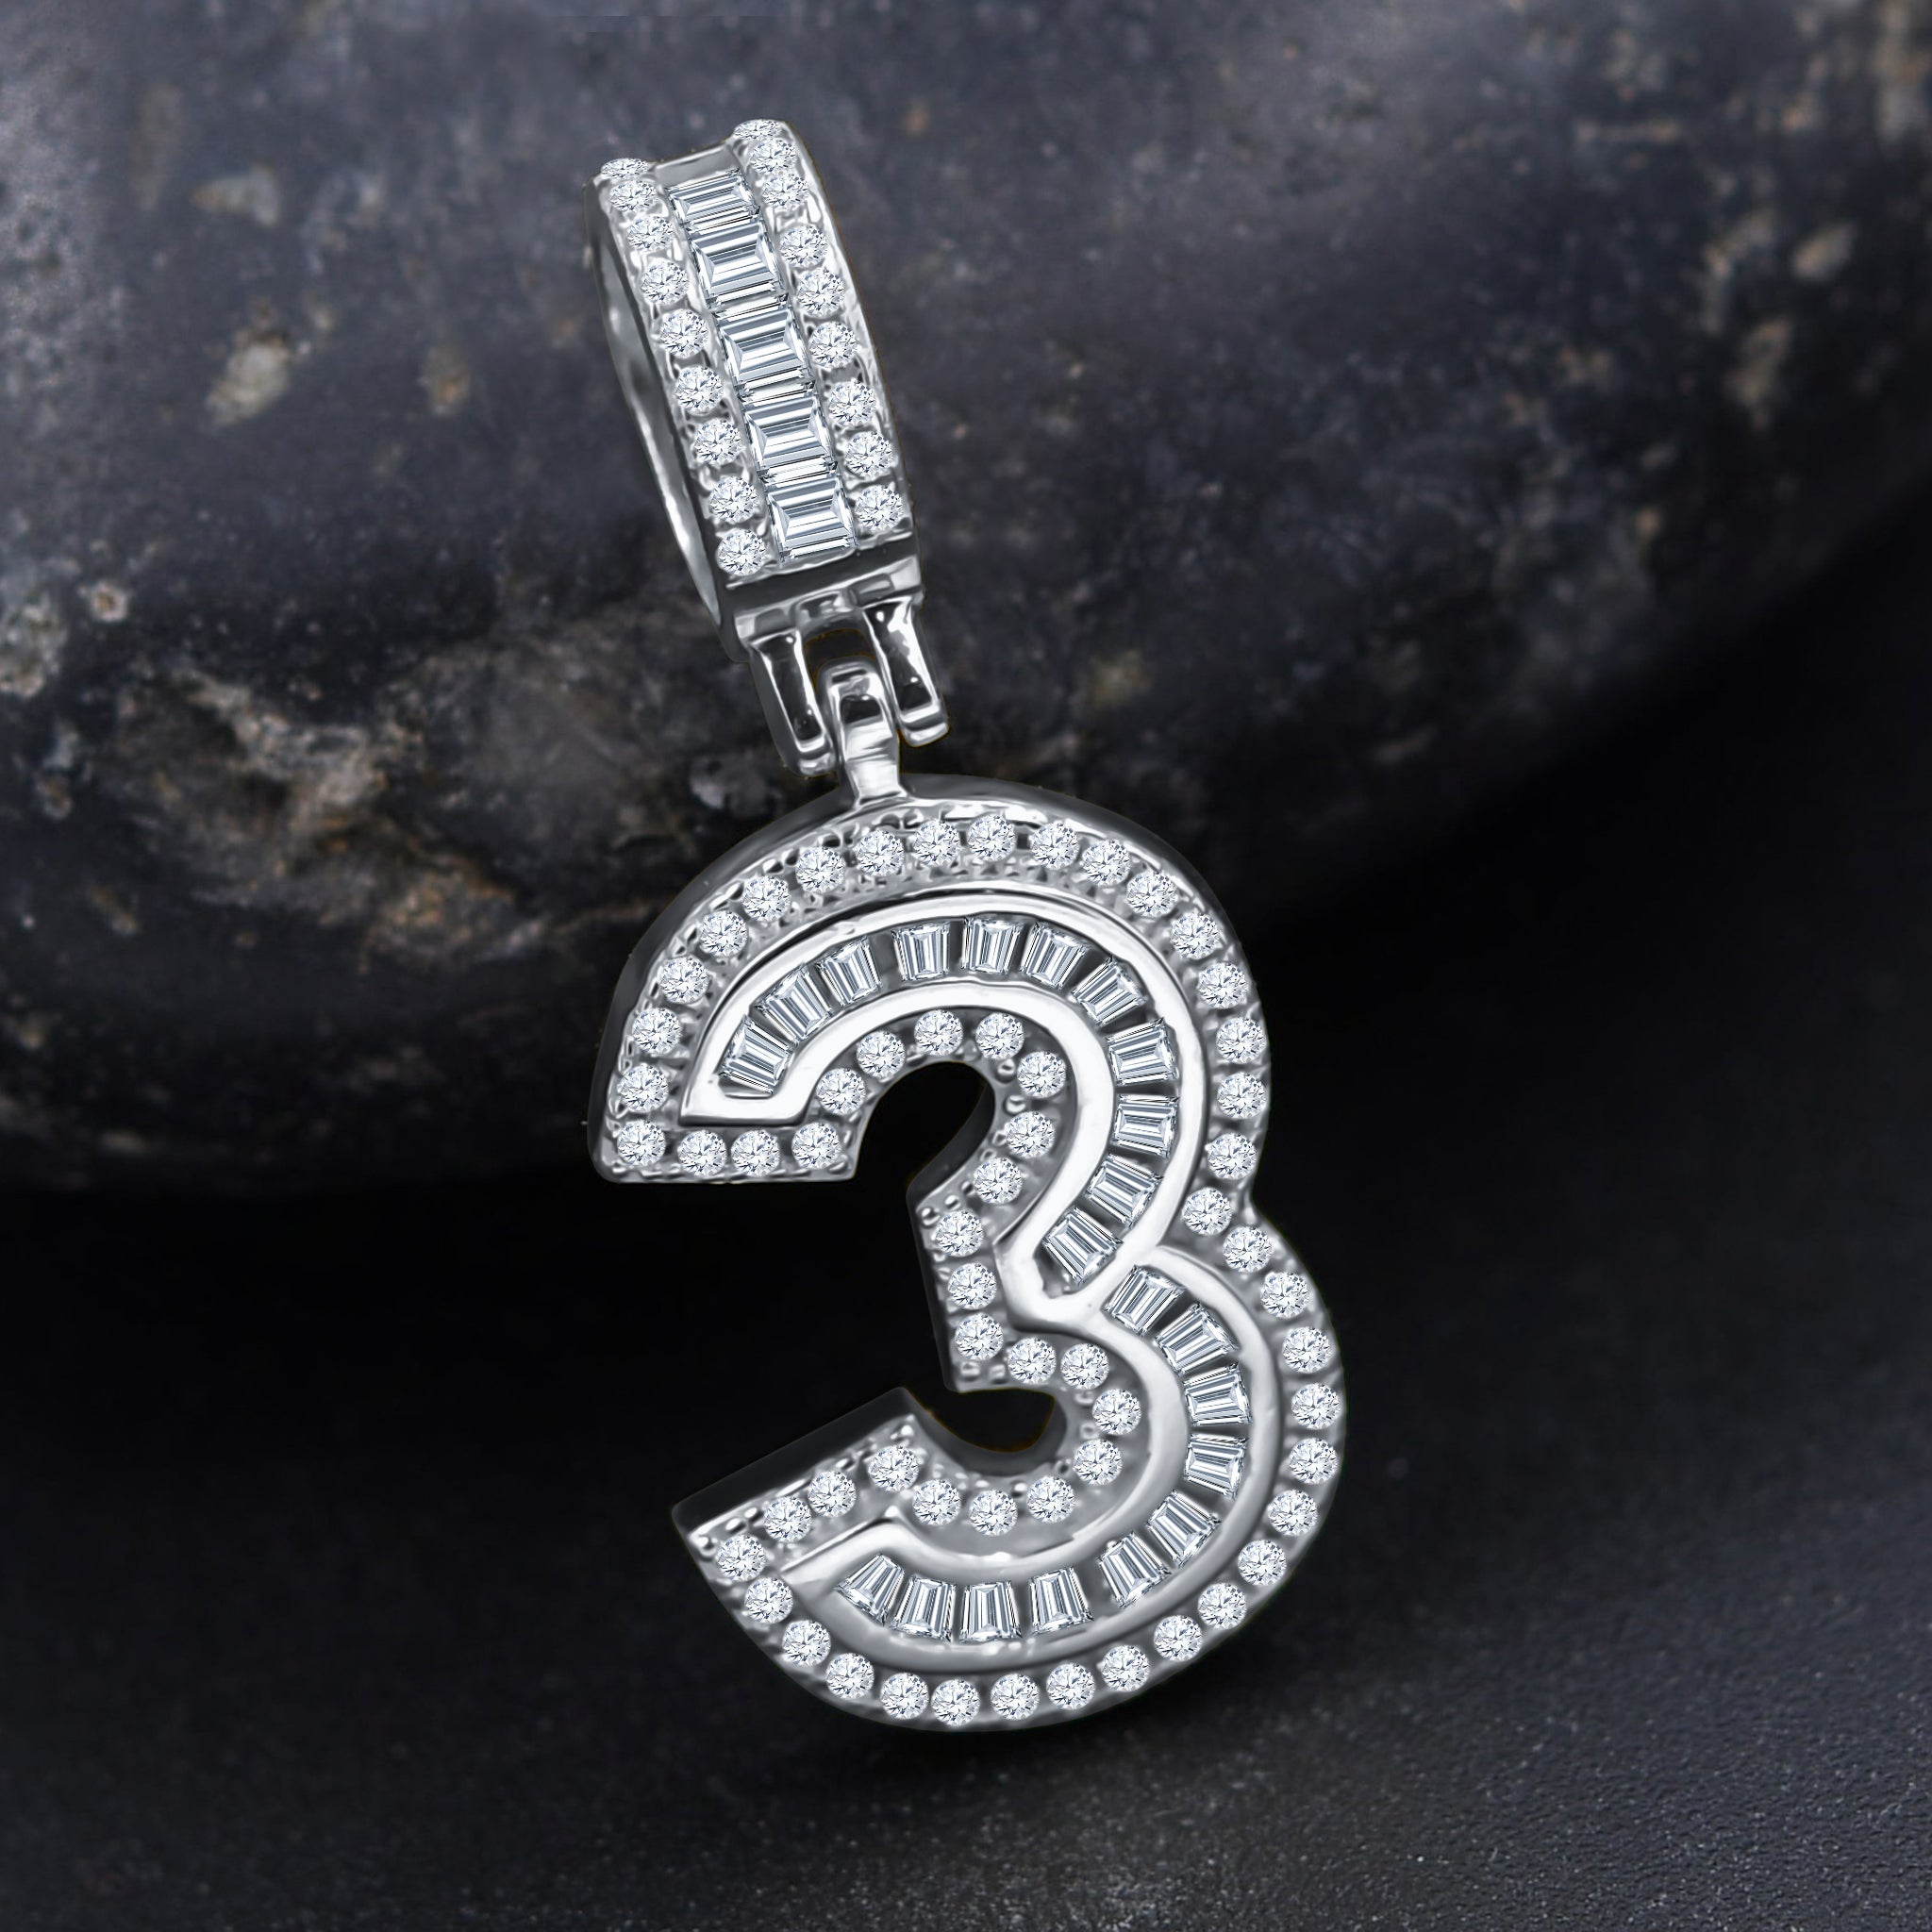 CIPHER STERLING SILVER (NUMERIC) PENDANT WITH CZ I 9218381